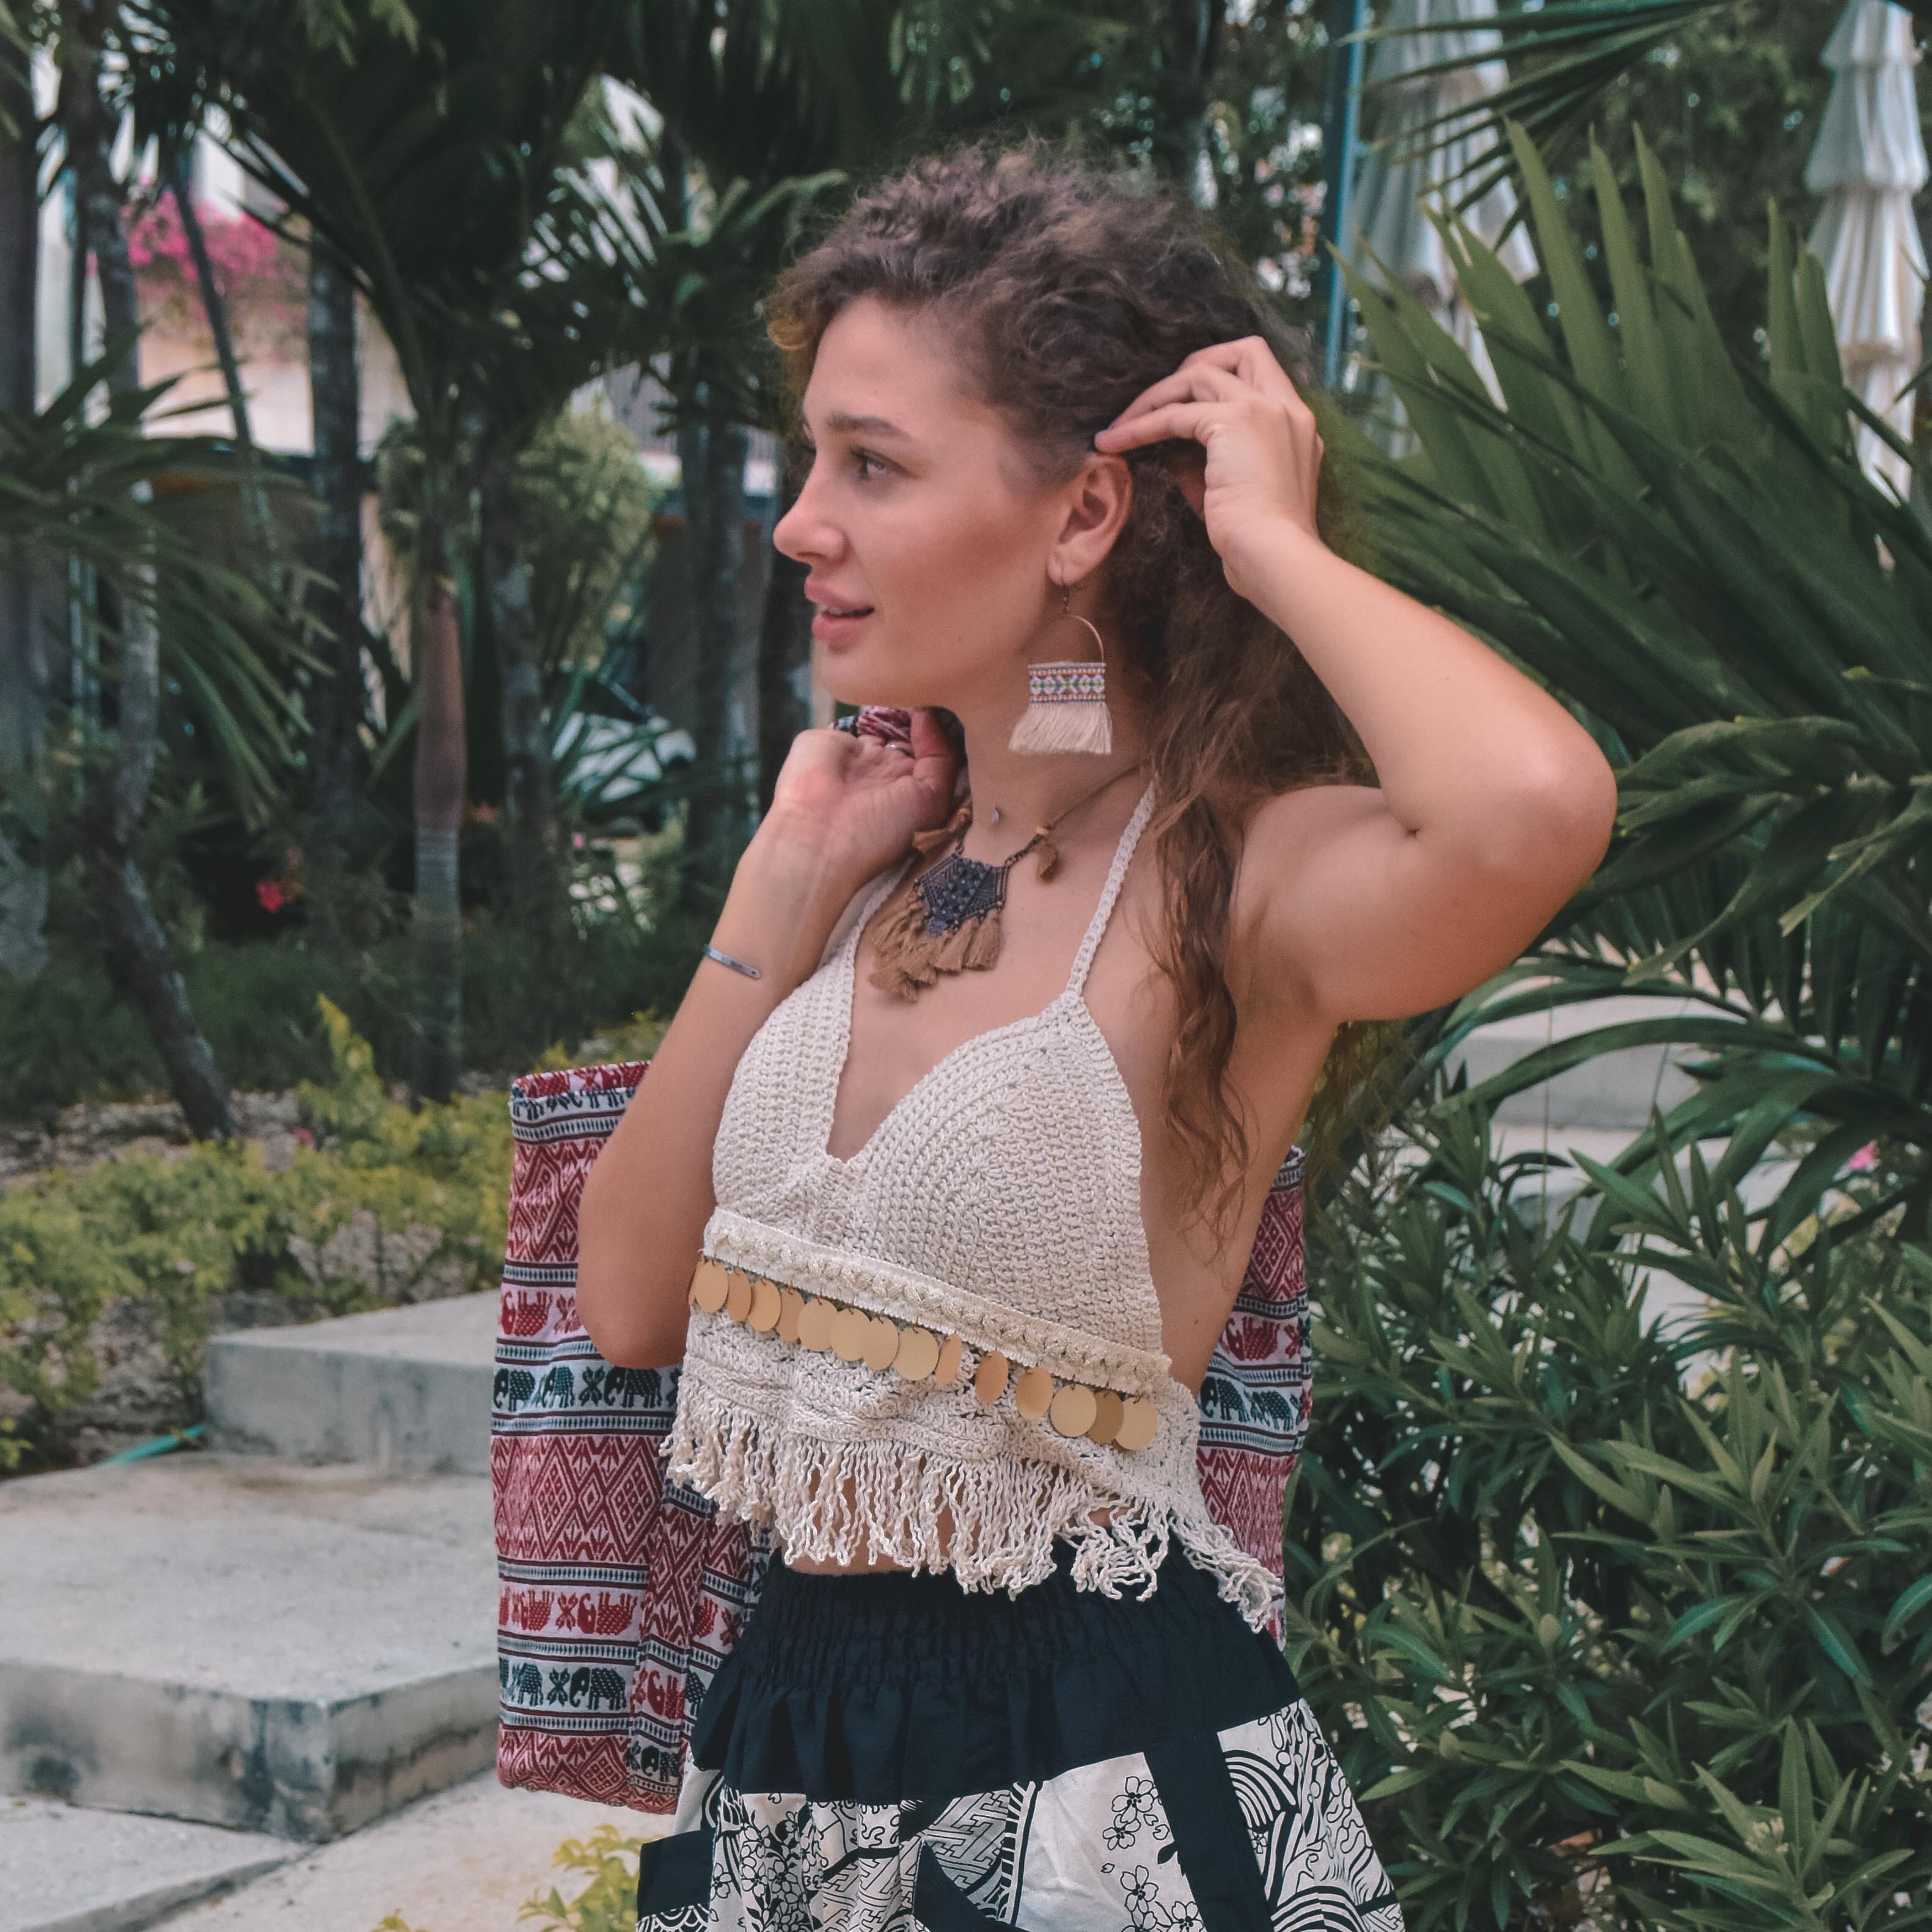 KRABI NECKLACE Elepanta Necklaces - Buy Today Elephant Pants Jewelry And Bohemian Clothes Handmade In Thailand Help To Save The Elephants FairTrade And Vegan